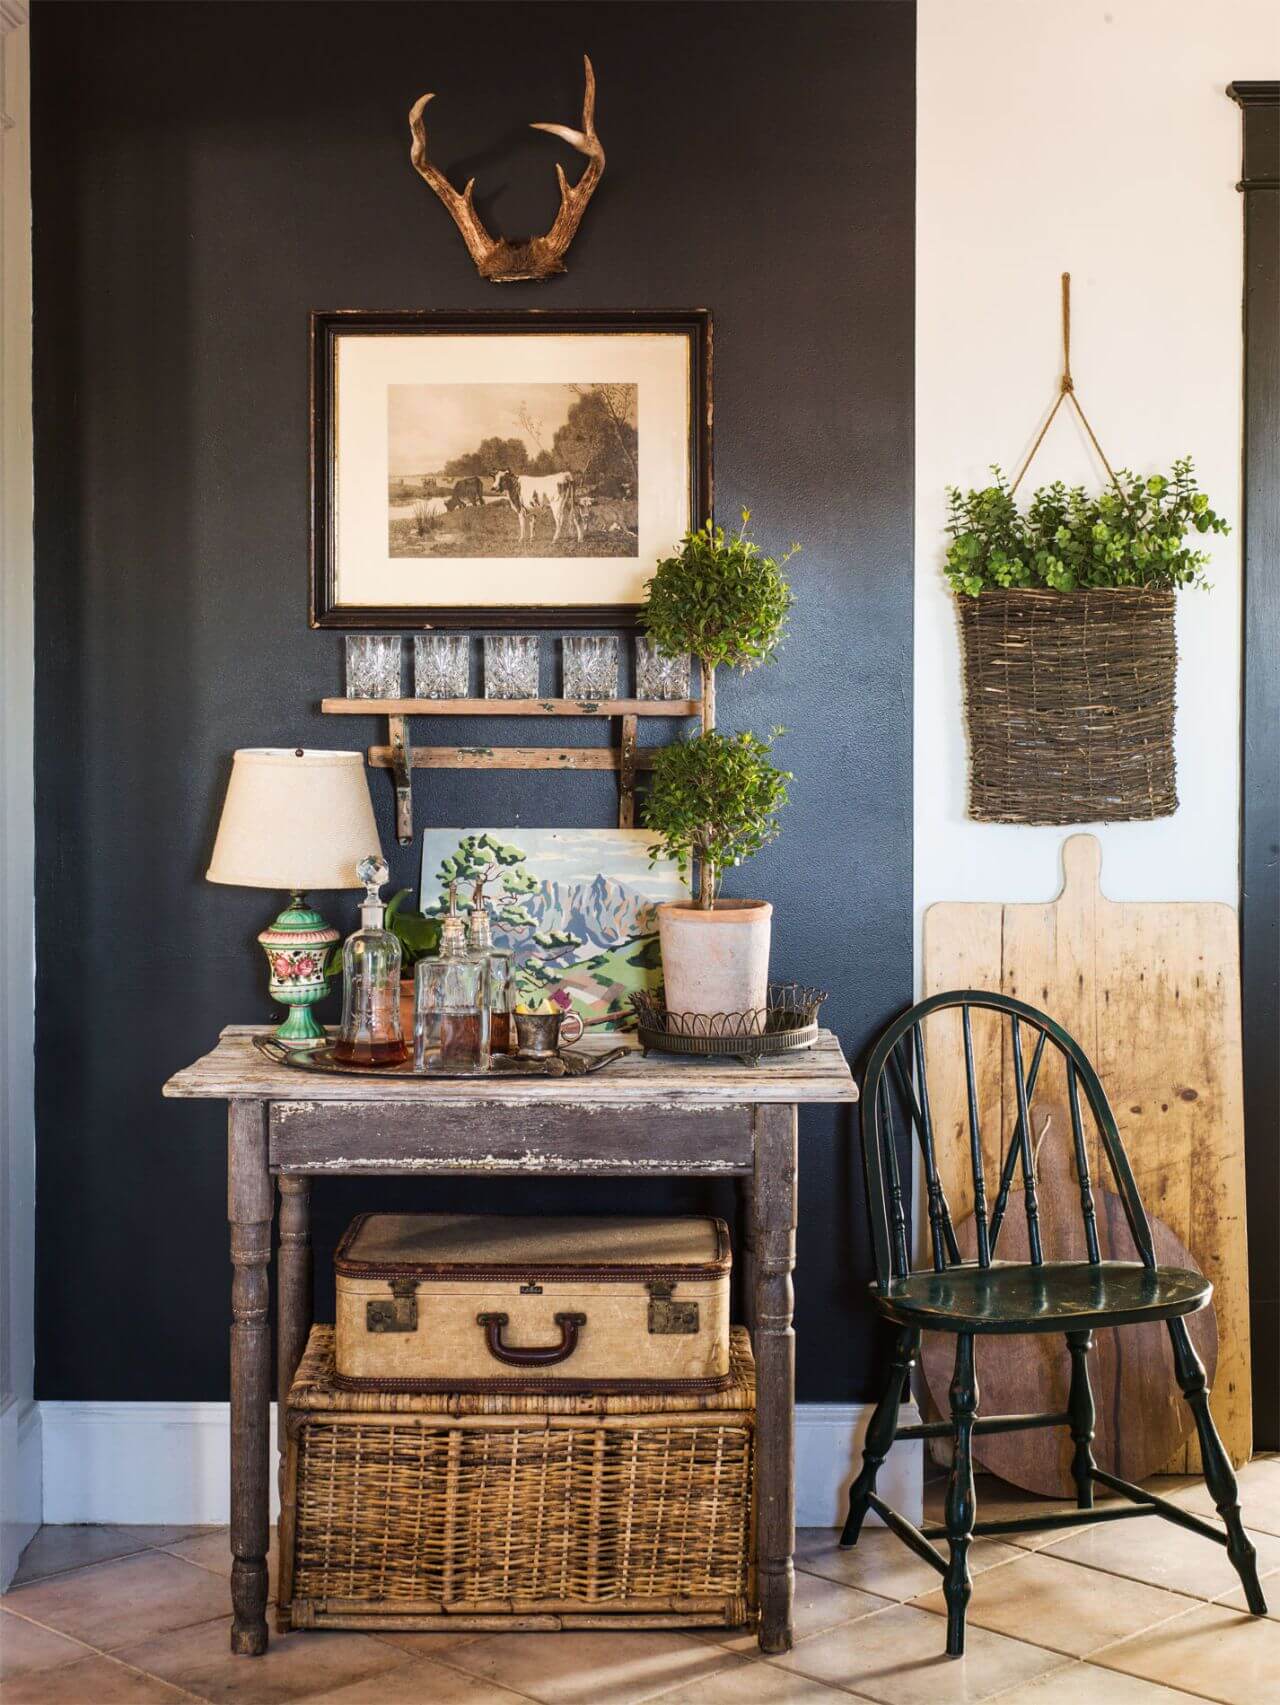 Dark accent wall, old table with topiary plants